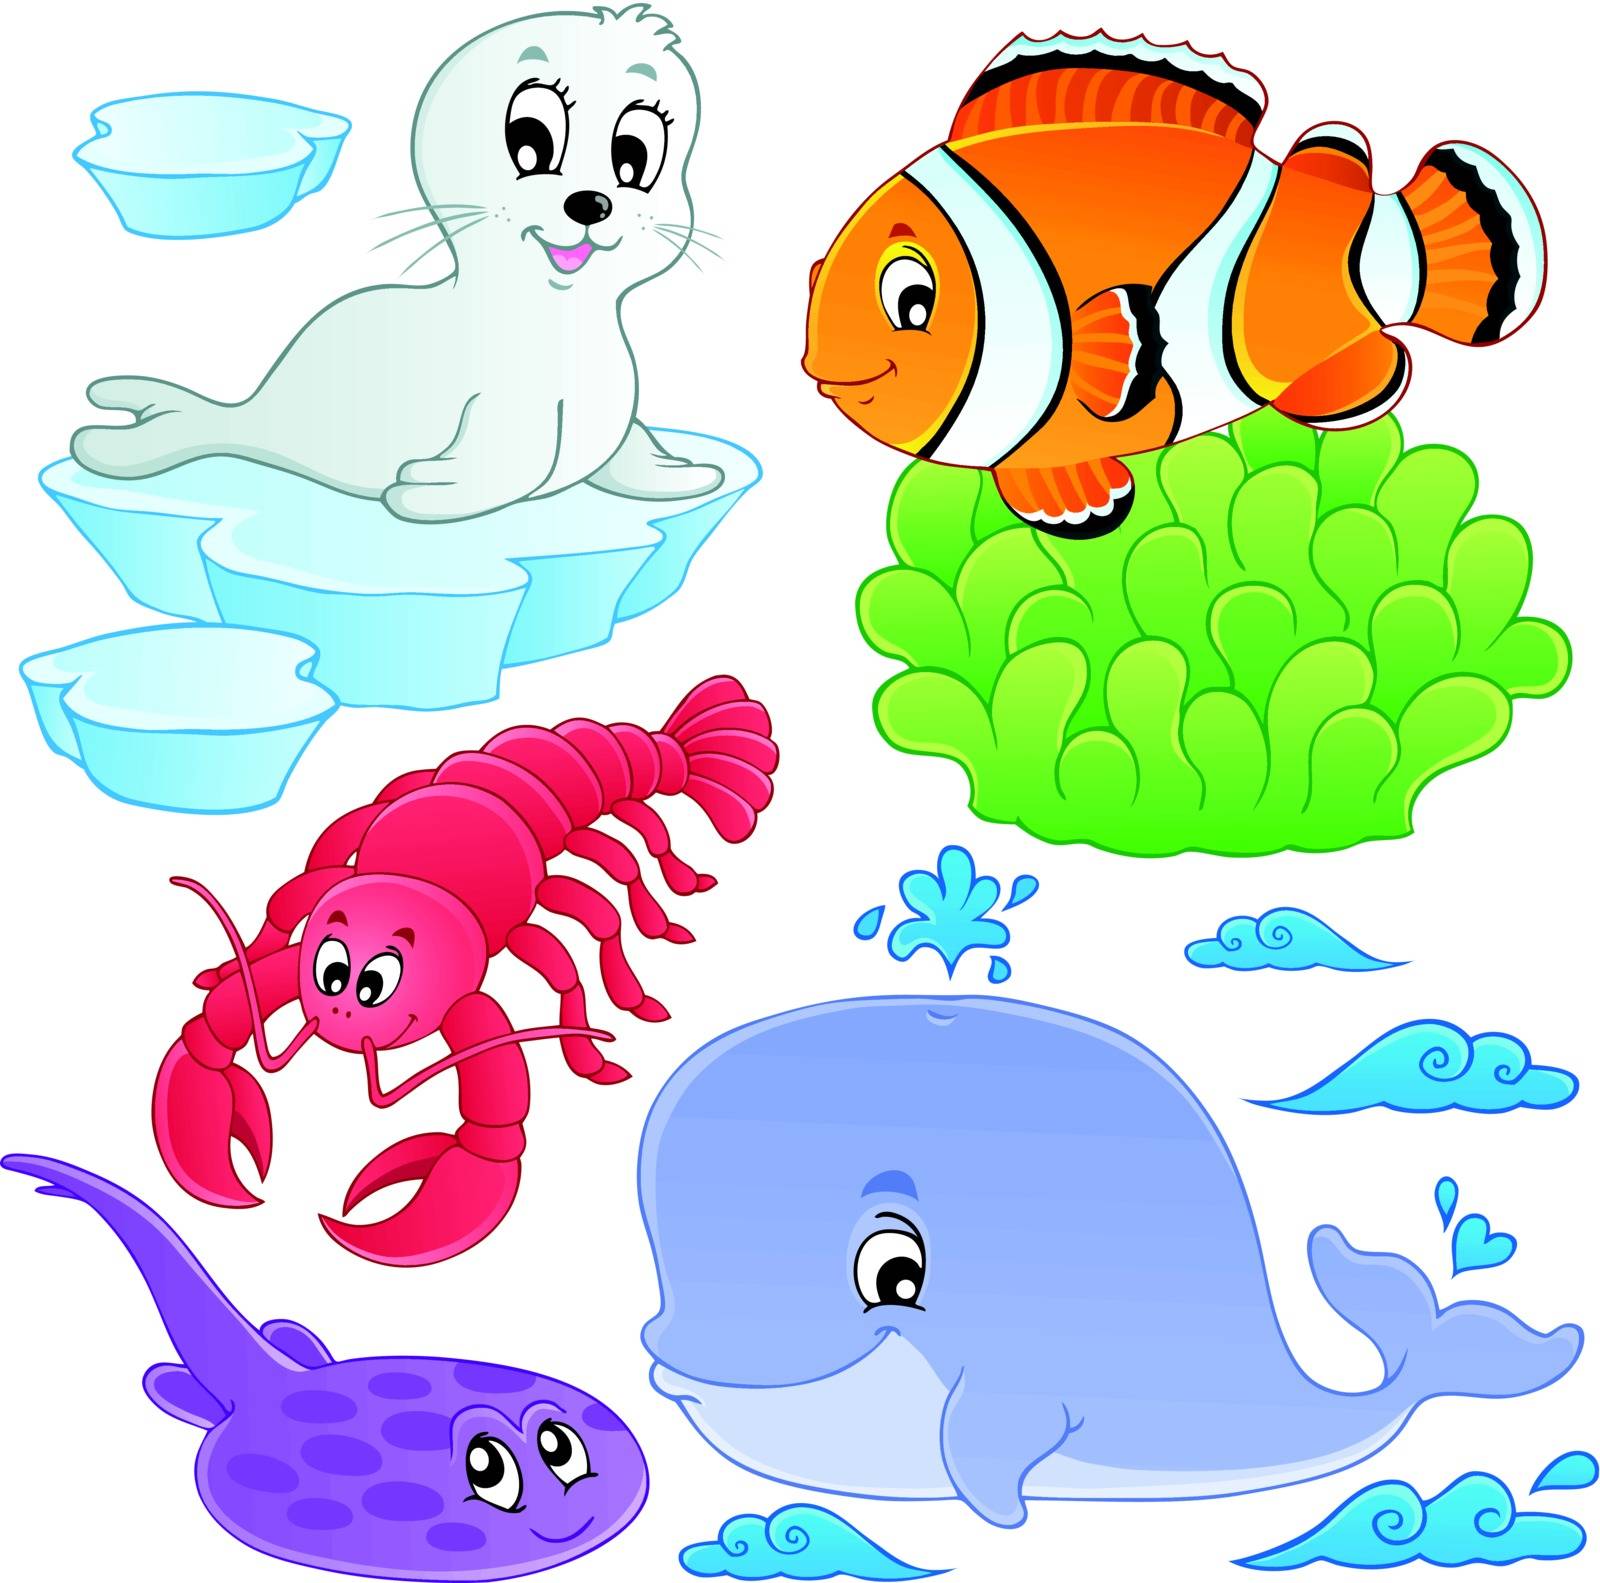 Sea fishes and animals collection 5 - vector illustration.